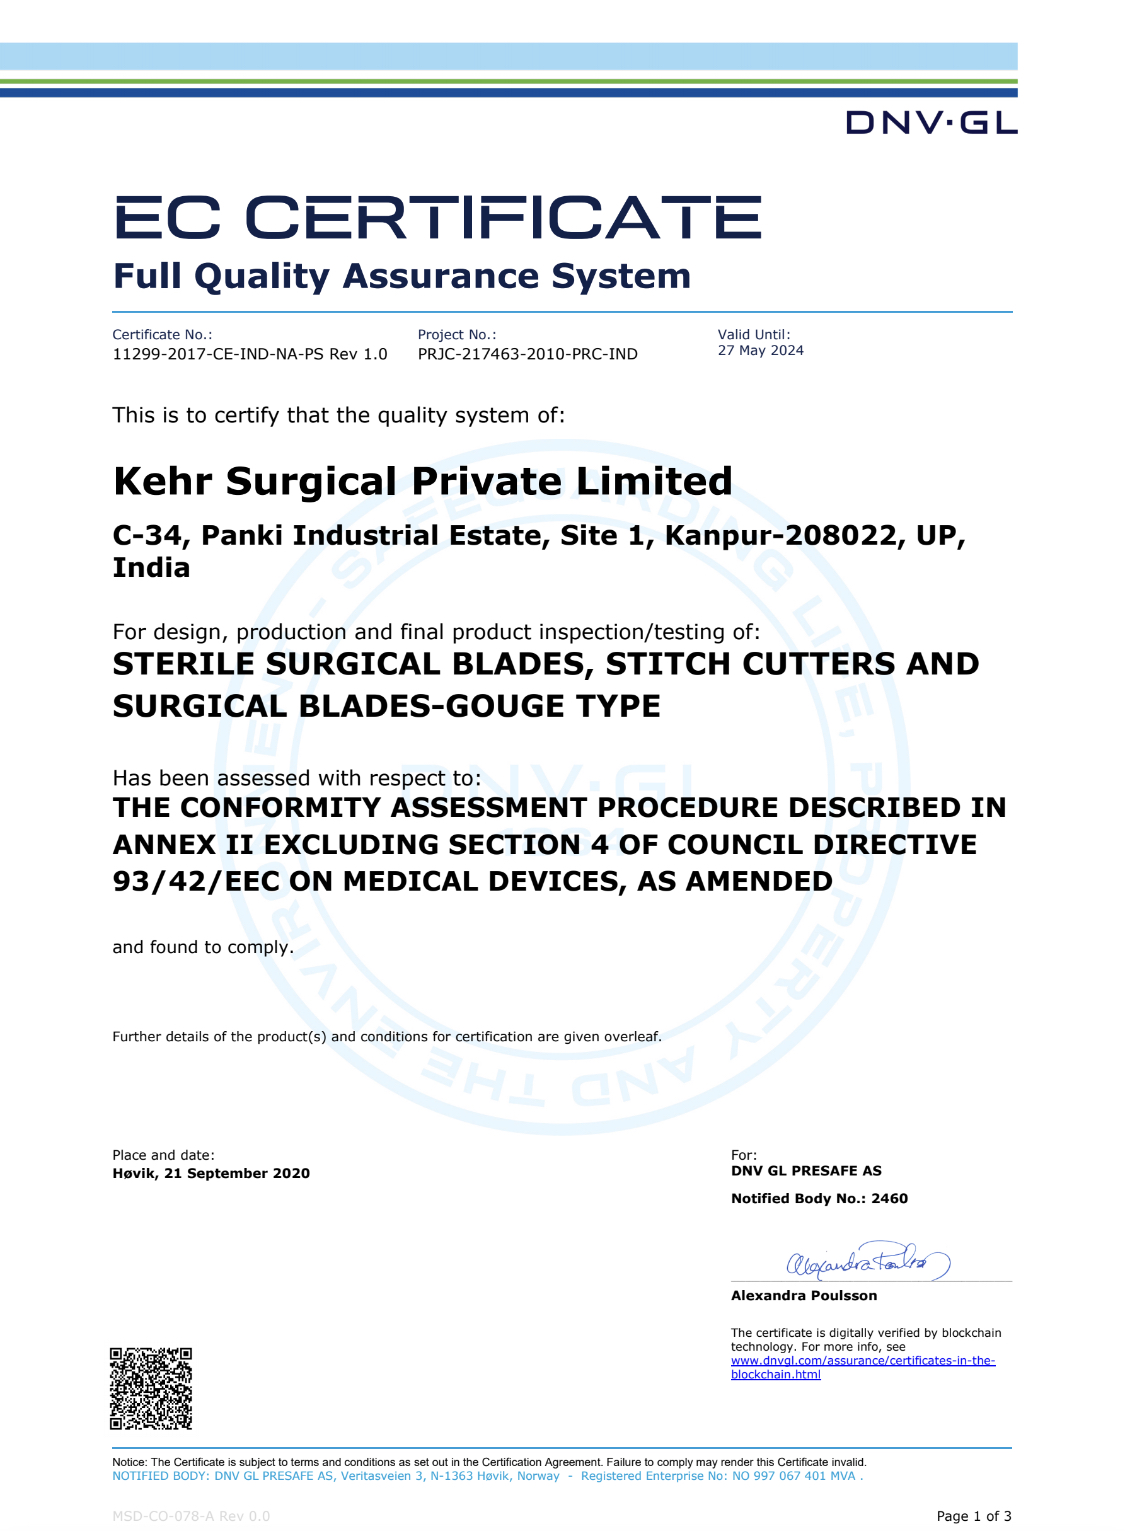 Kehr Surgical Private Limited EC Certificate